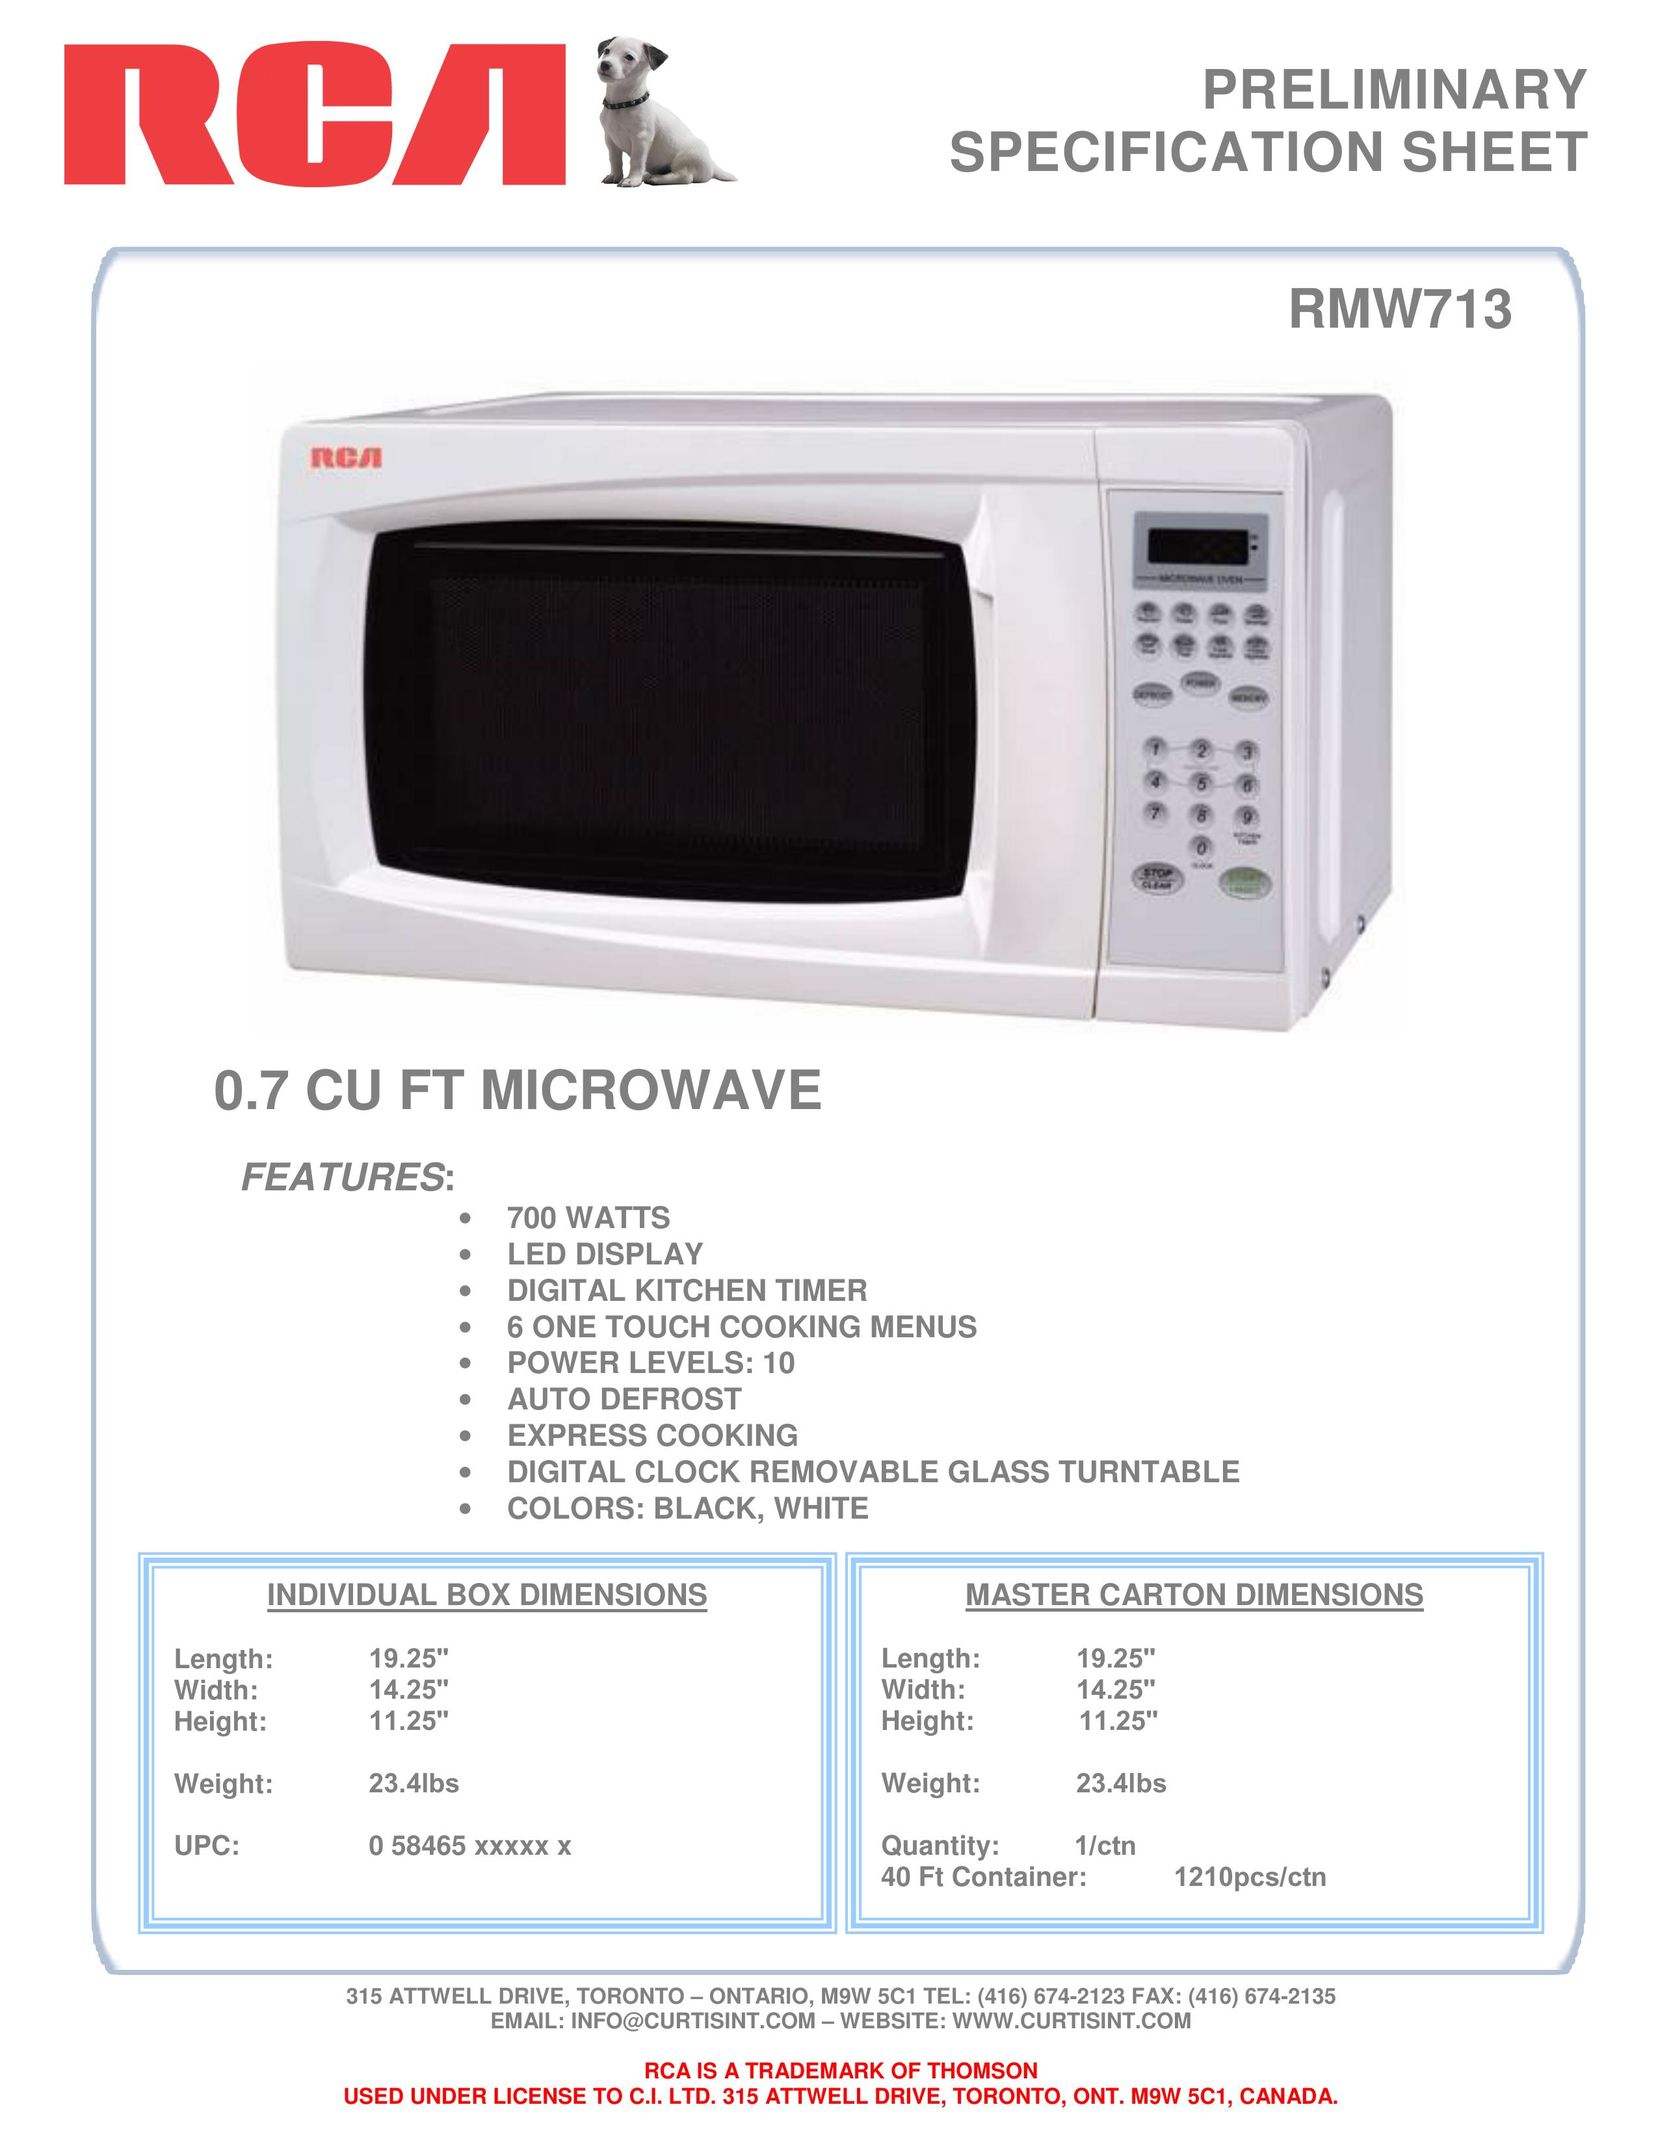 Curtis RMW713 Microwave Oven User Manual